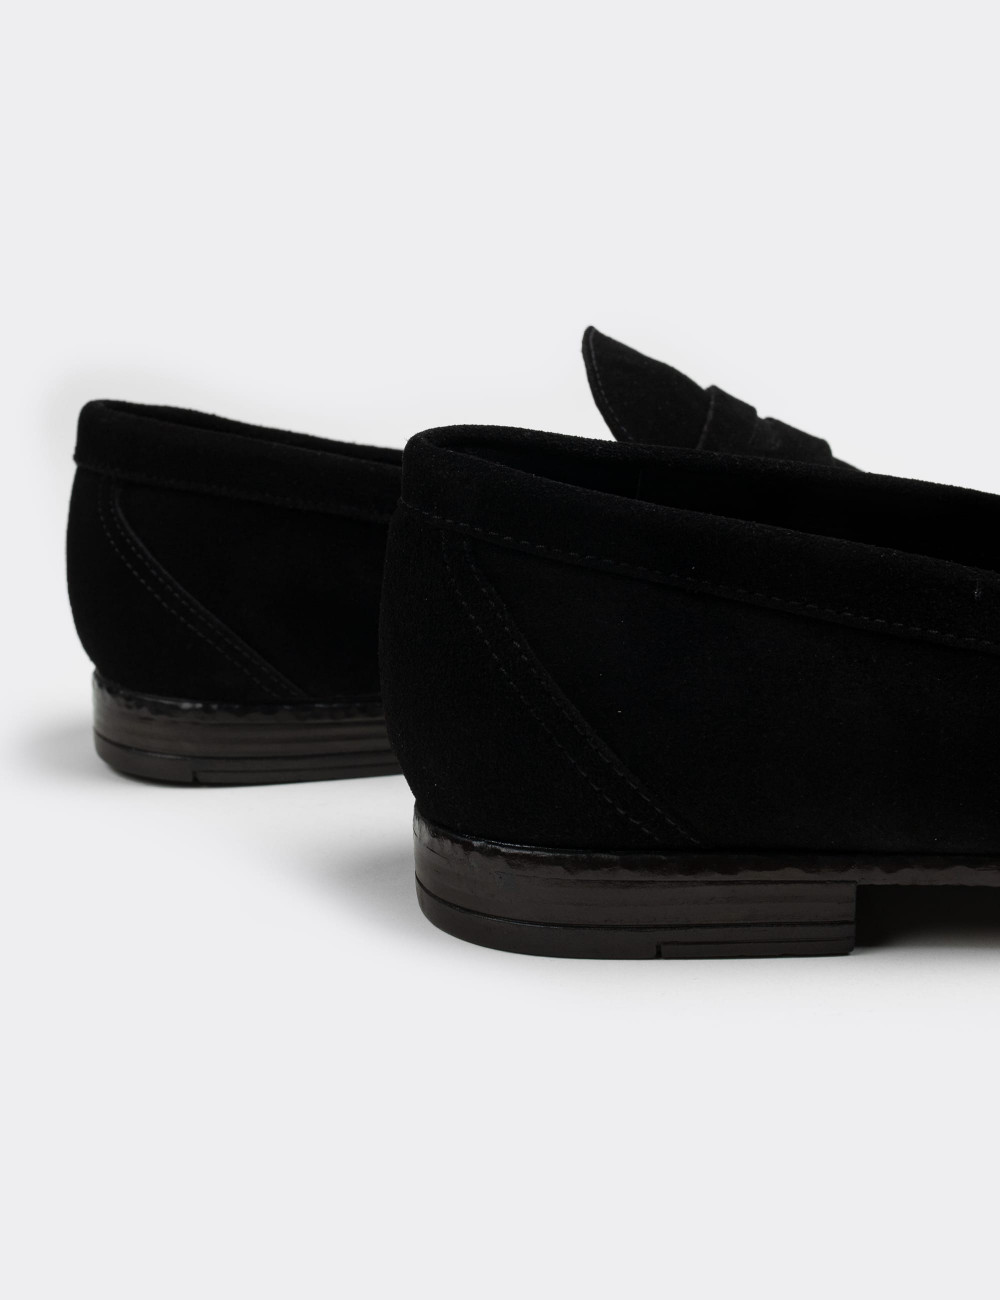 Black Suede Leather Loafers - 01538MSYHC01